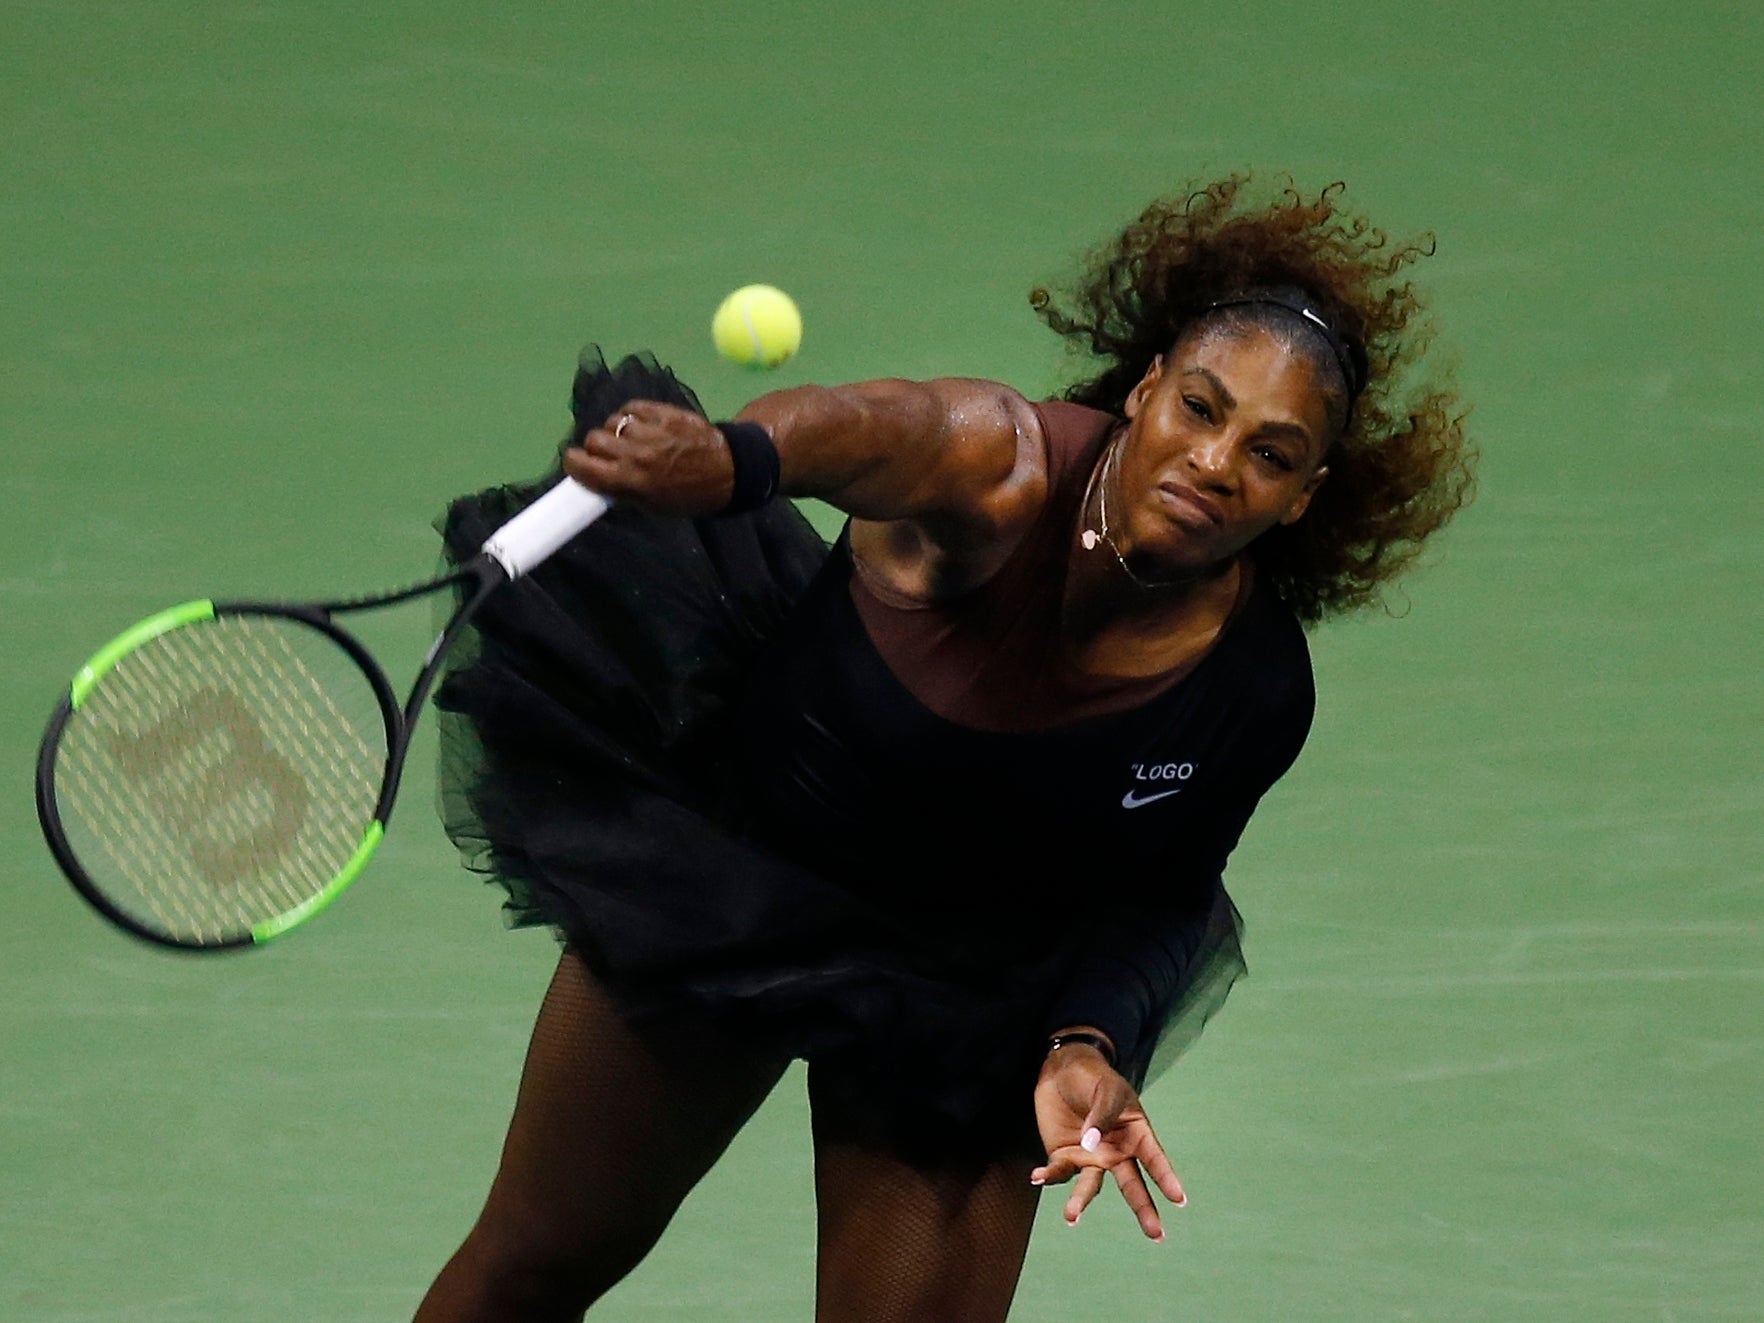 Williams clinched victory in straight sets to reach the last four